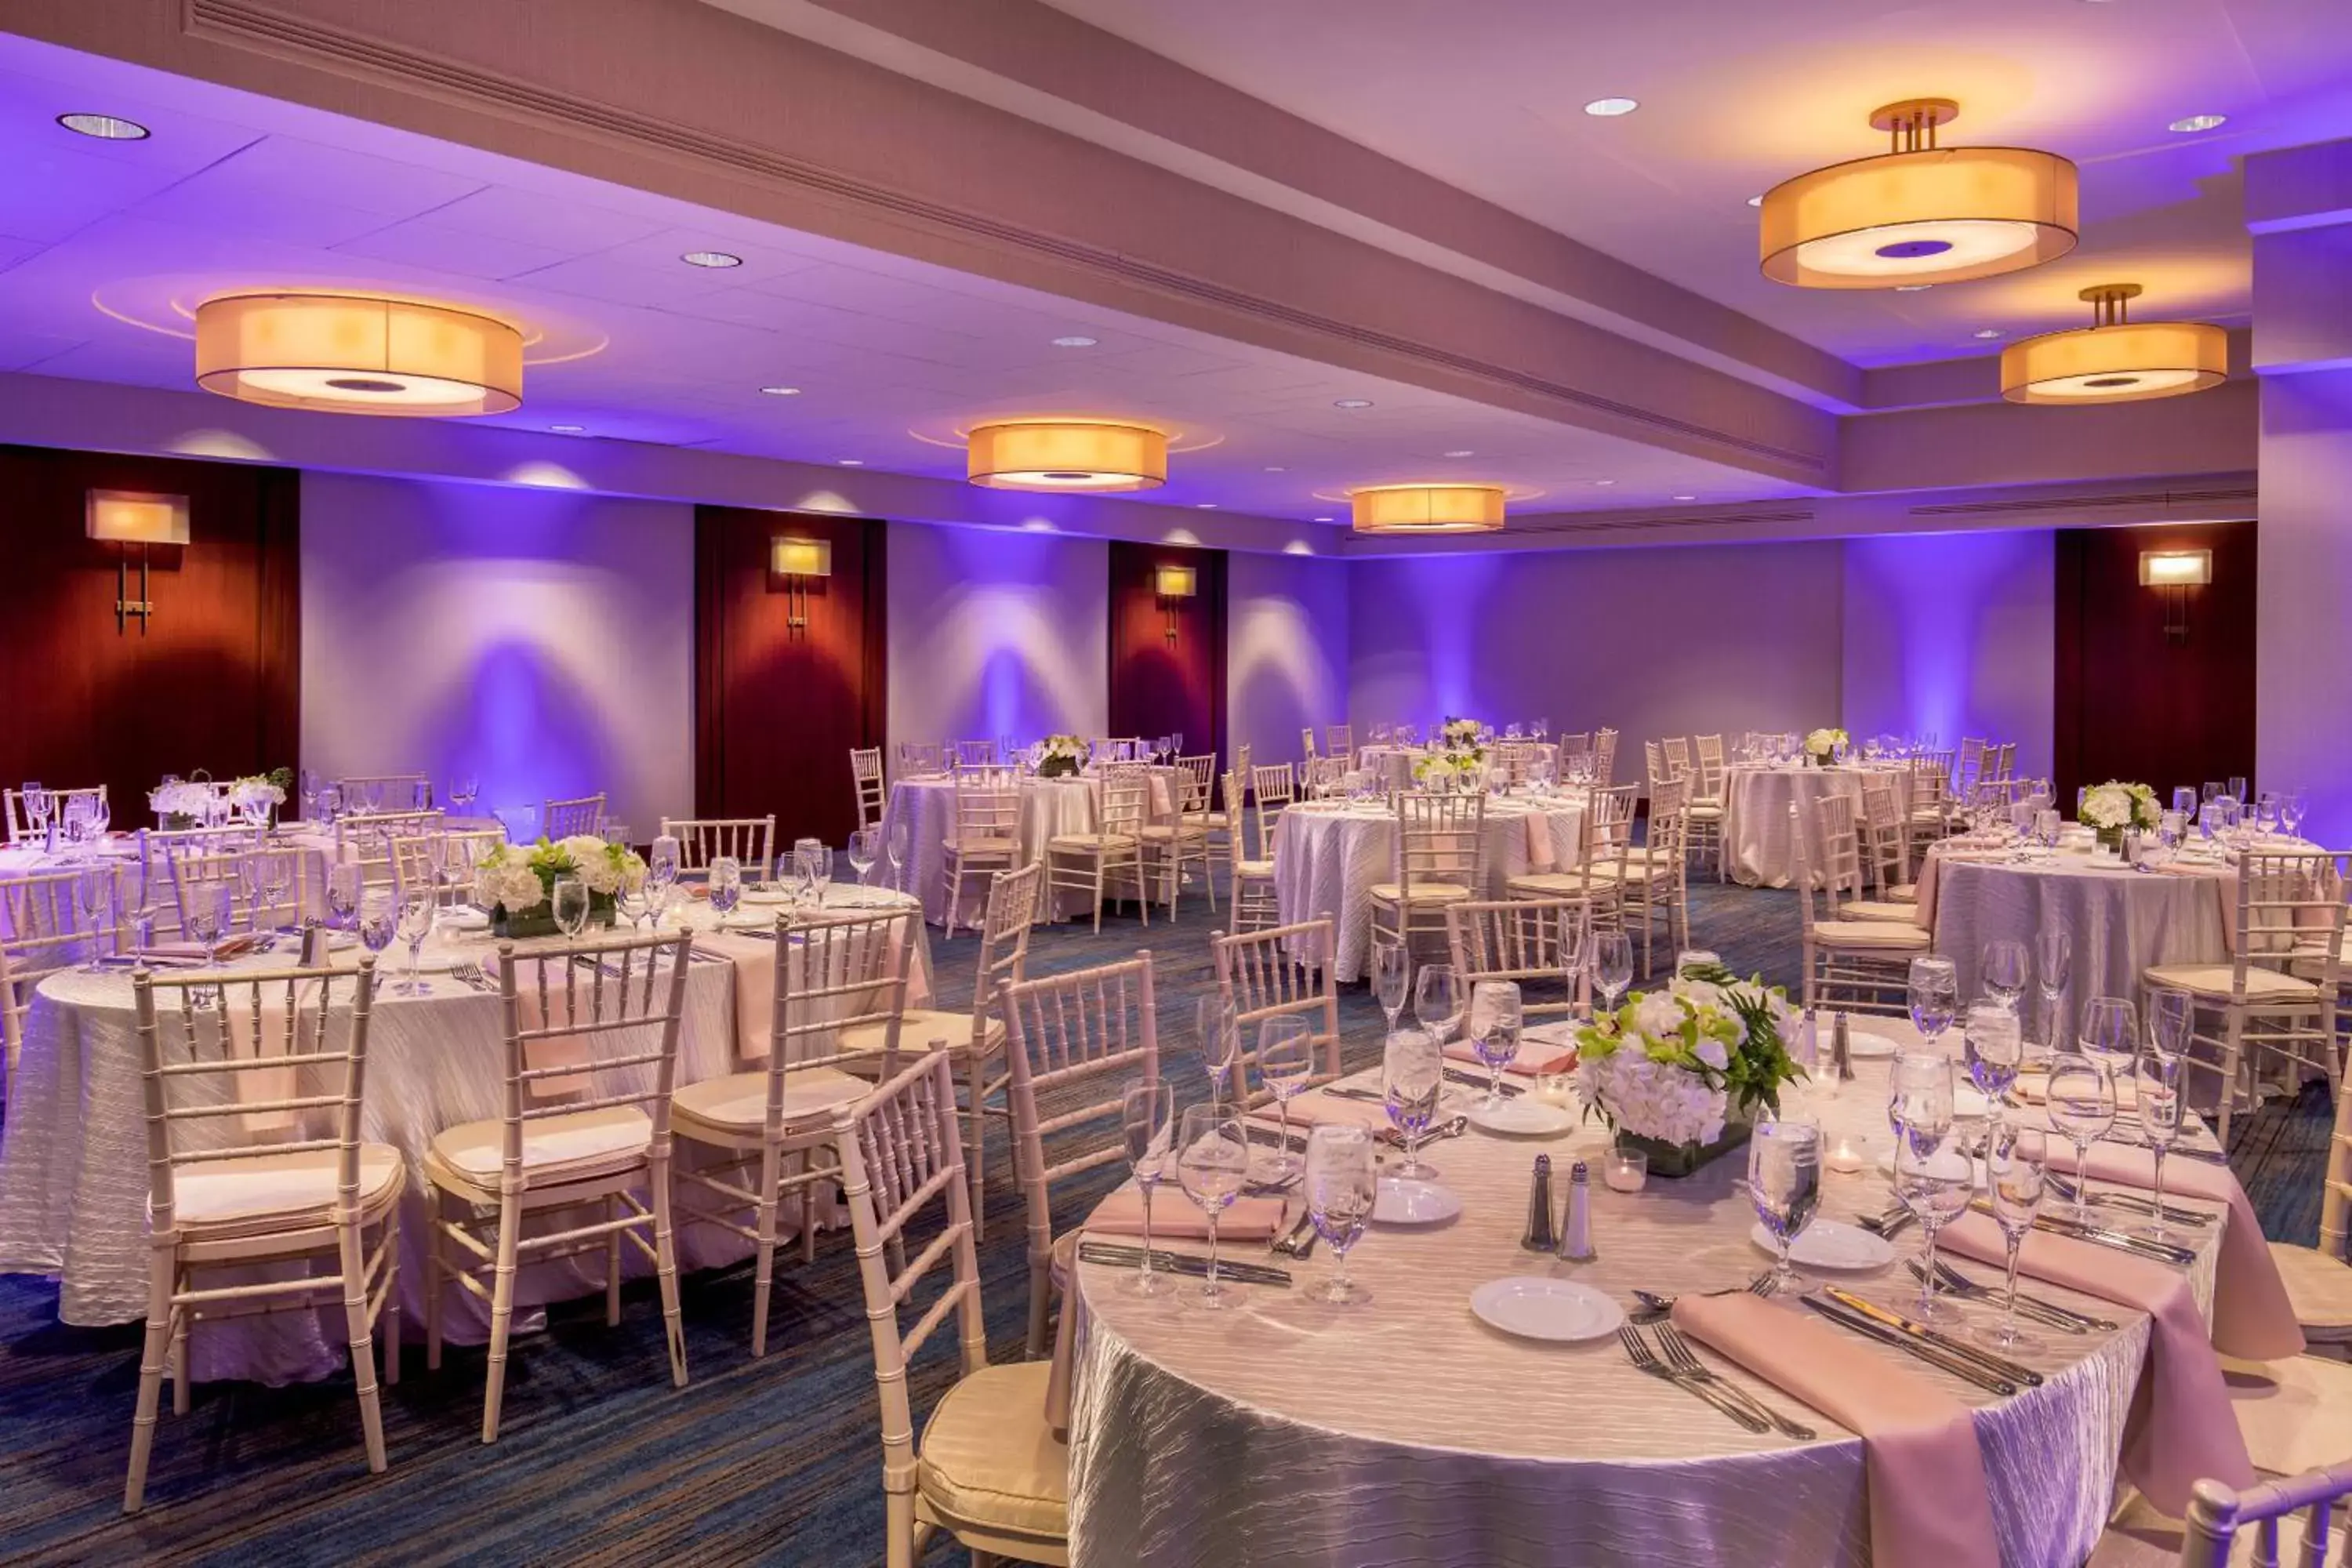 Meeting/conference room, Banquet Facilities in The Westin Waltham Boston